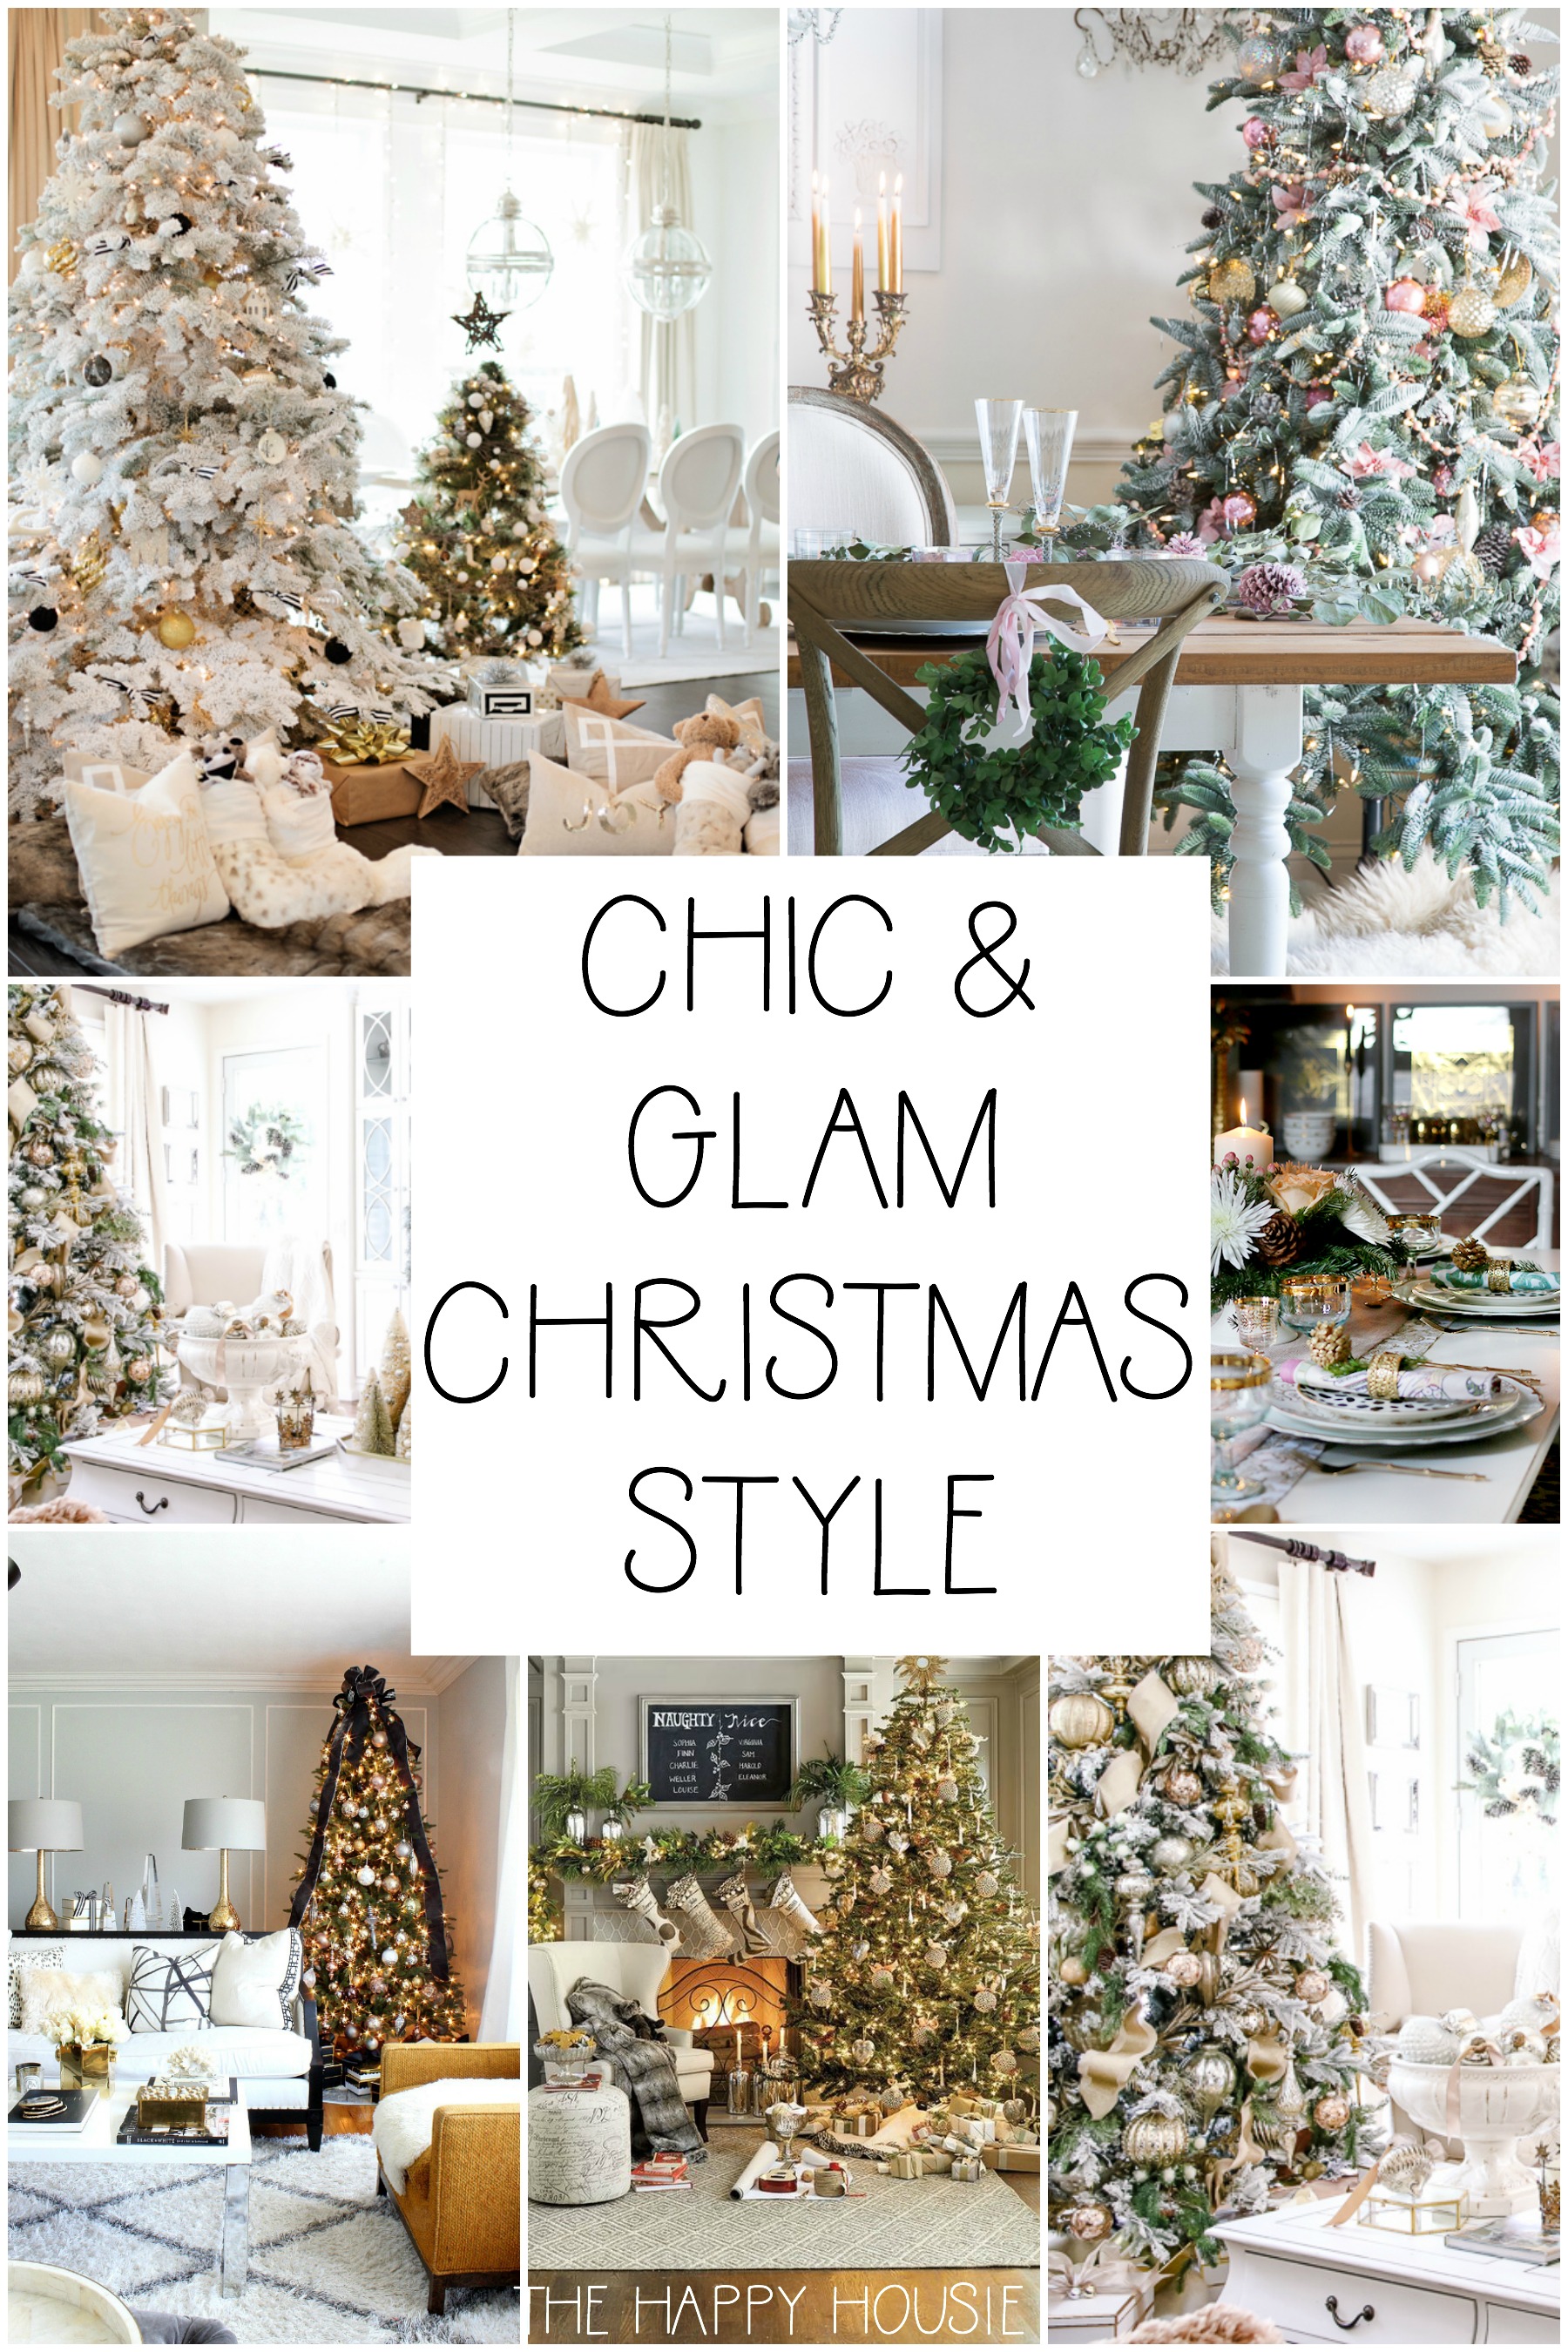 Chic & Glam Christmas Style poster.